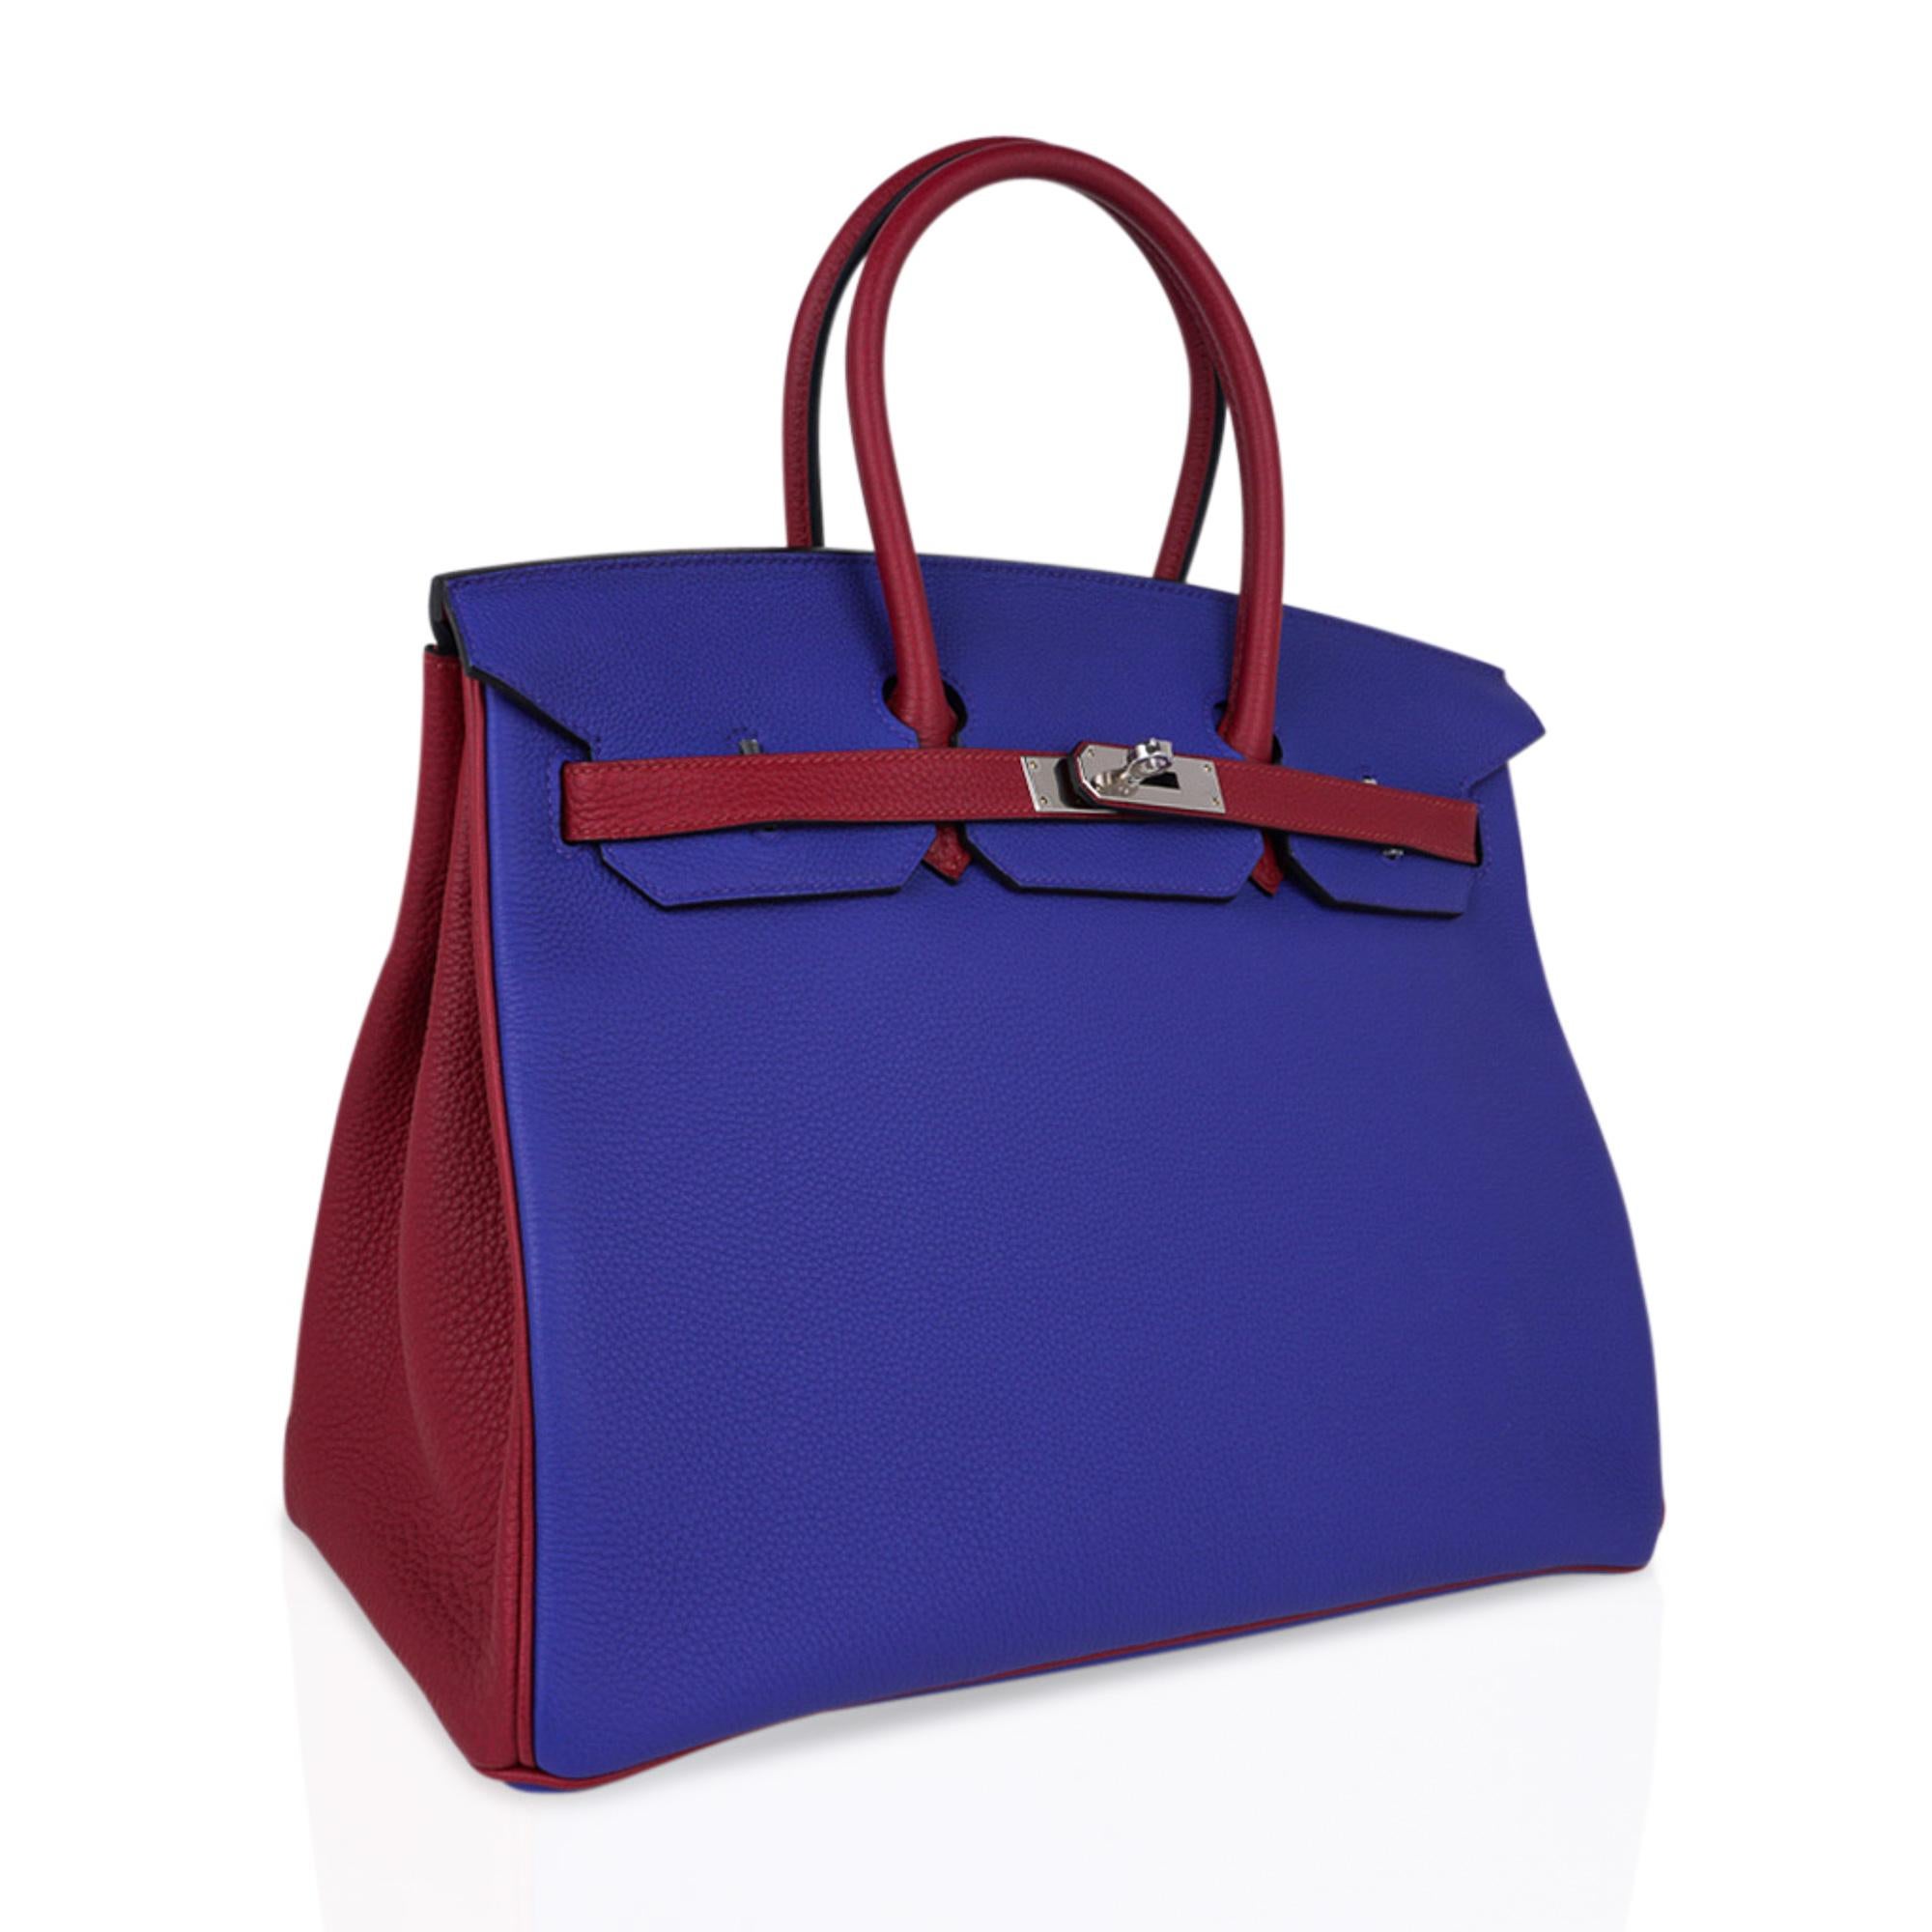 Mightychic offers an Hermes Birkin HSS 35 bag featured in an exotic creation of vivid Bleu Electric and rich Rouge Grenat.
This Hermes Birkin special order is fresh with palladium hardware. 
Created in Togo leather which is scratch resistant.
Comes